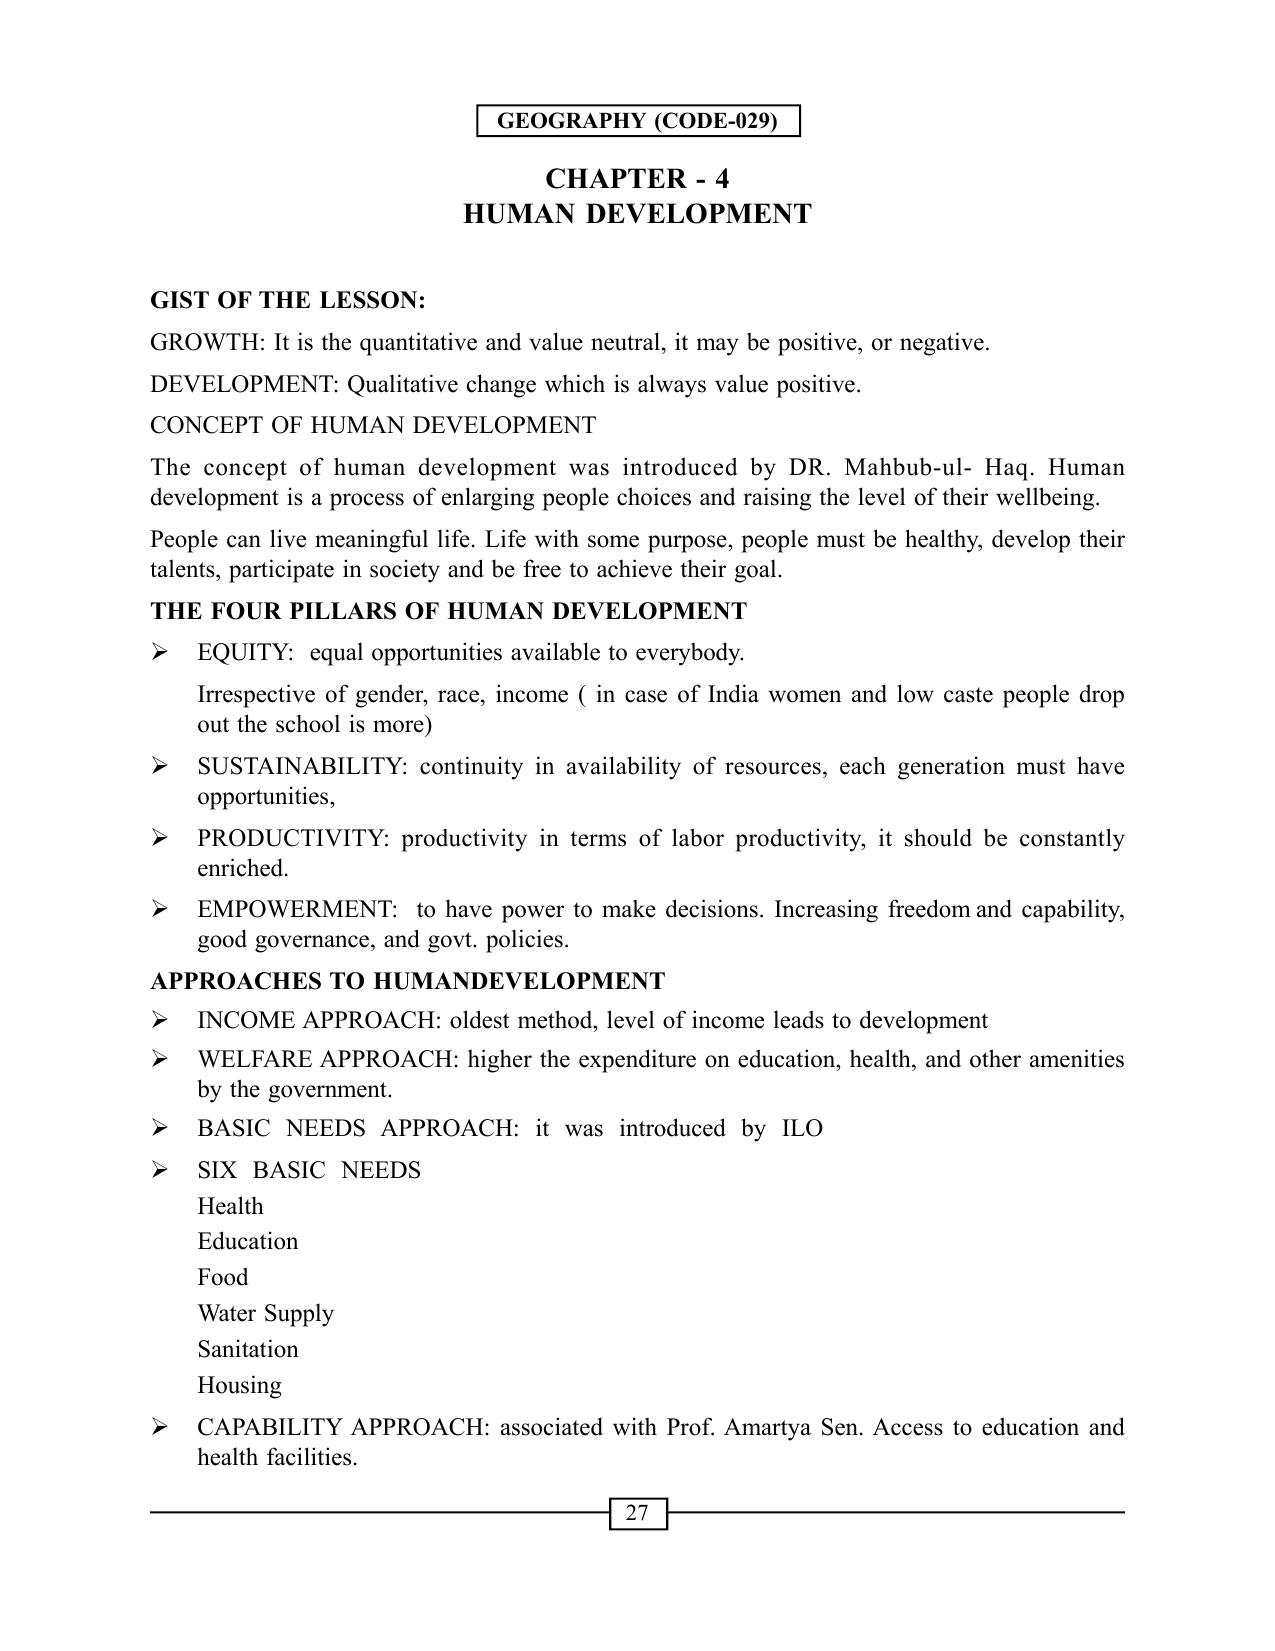 CBSE Worksheets for Class 12 Geography Human Development - Page 1